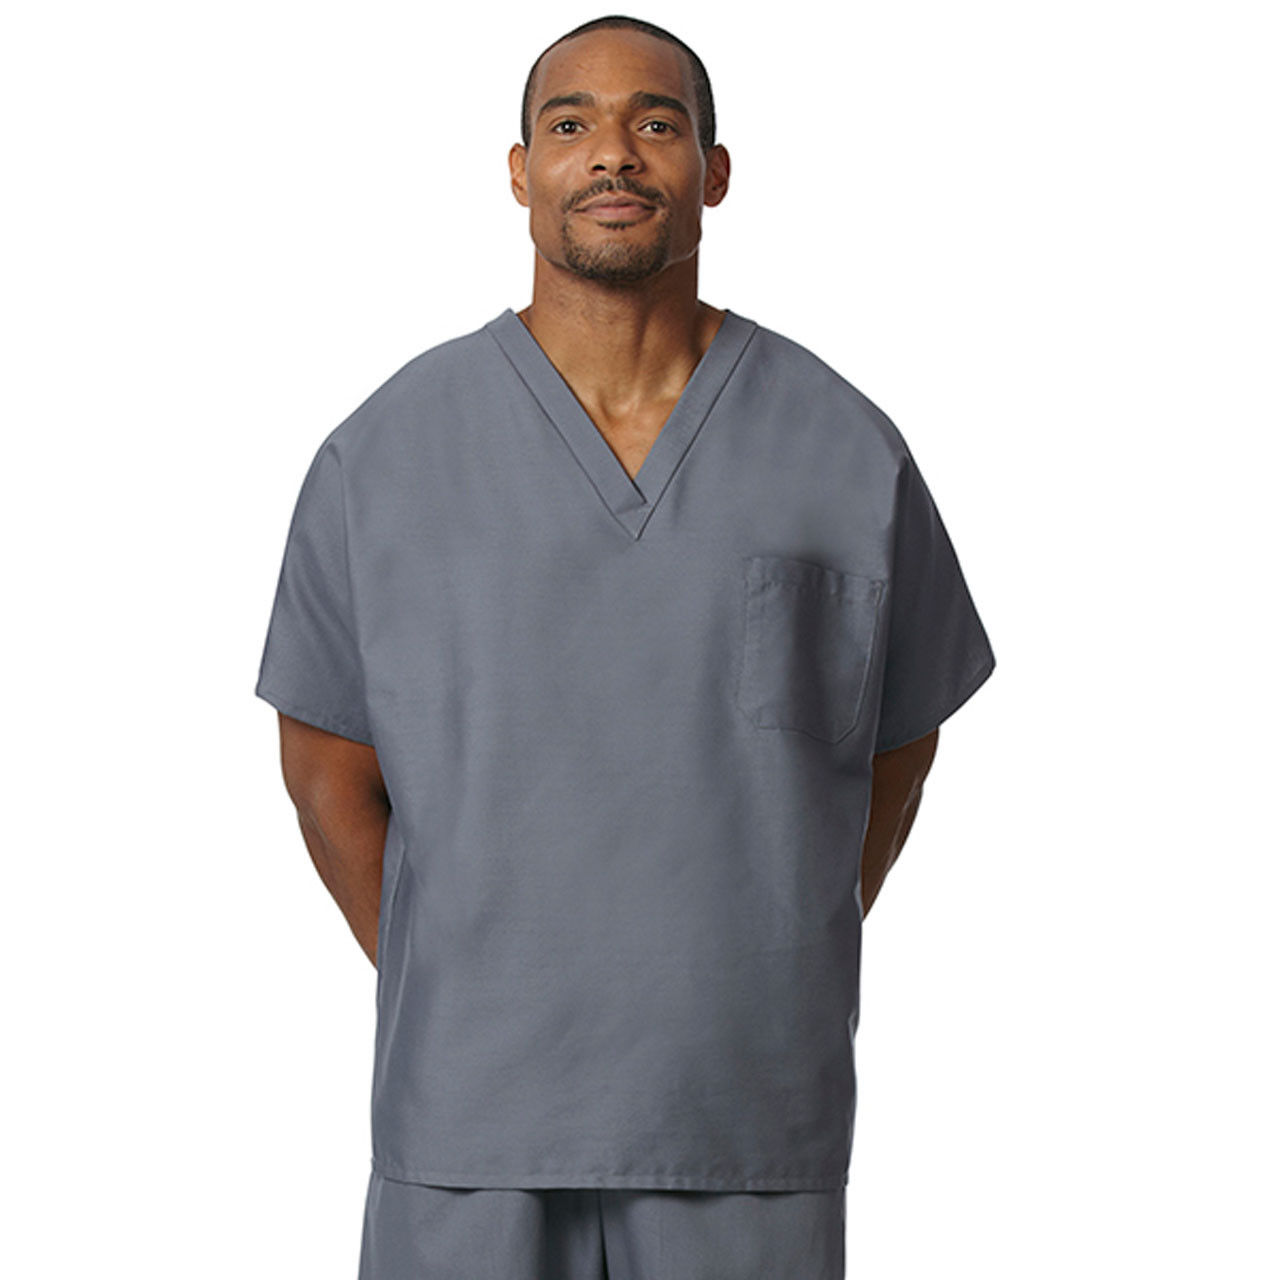 Are the Womens and Mens Tall Scrub Tops both comfortable and durable?